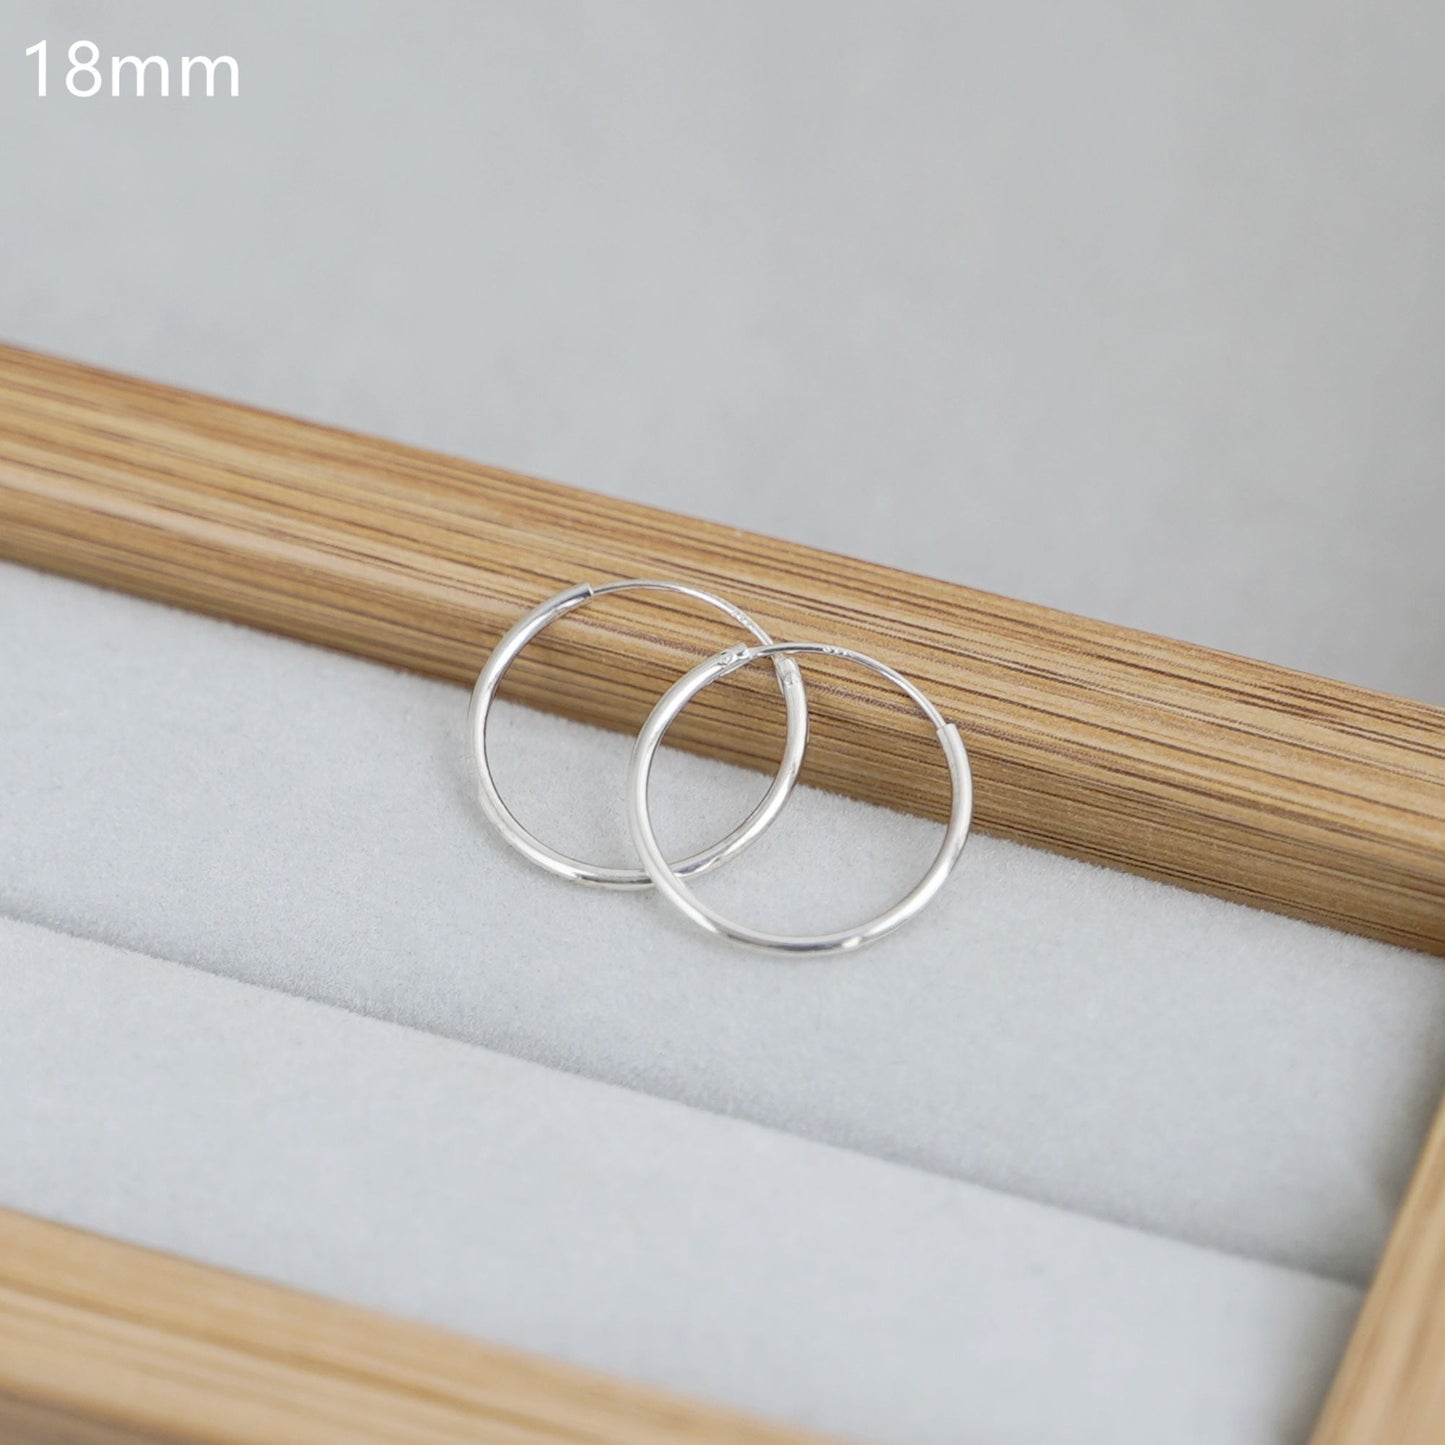 Sterling Silver Hinged Plain Hoops Small to Large Sleepers Earrings 10 - 60mm